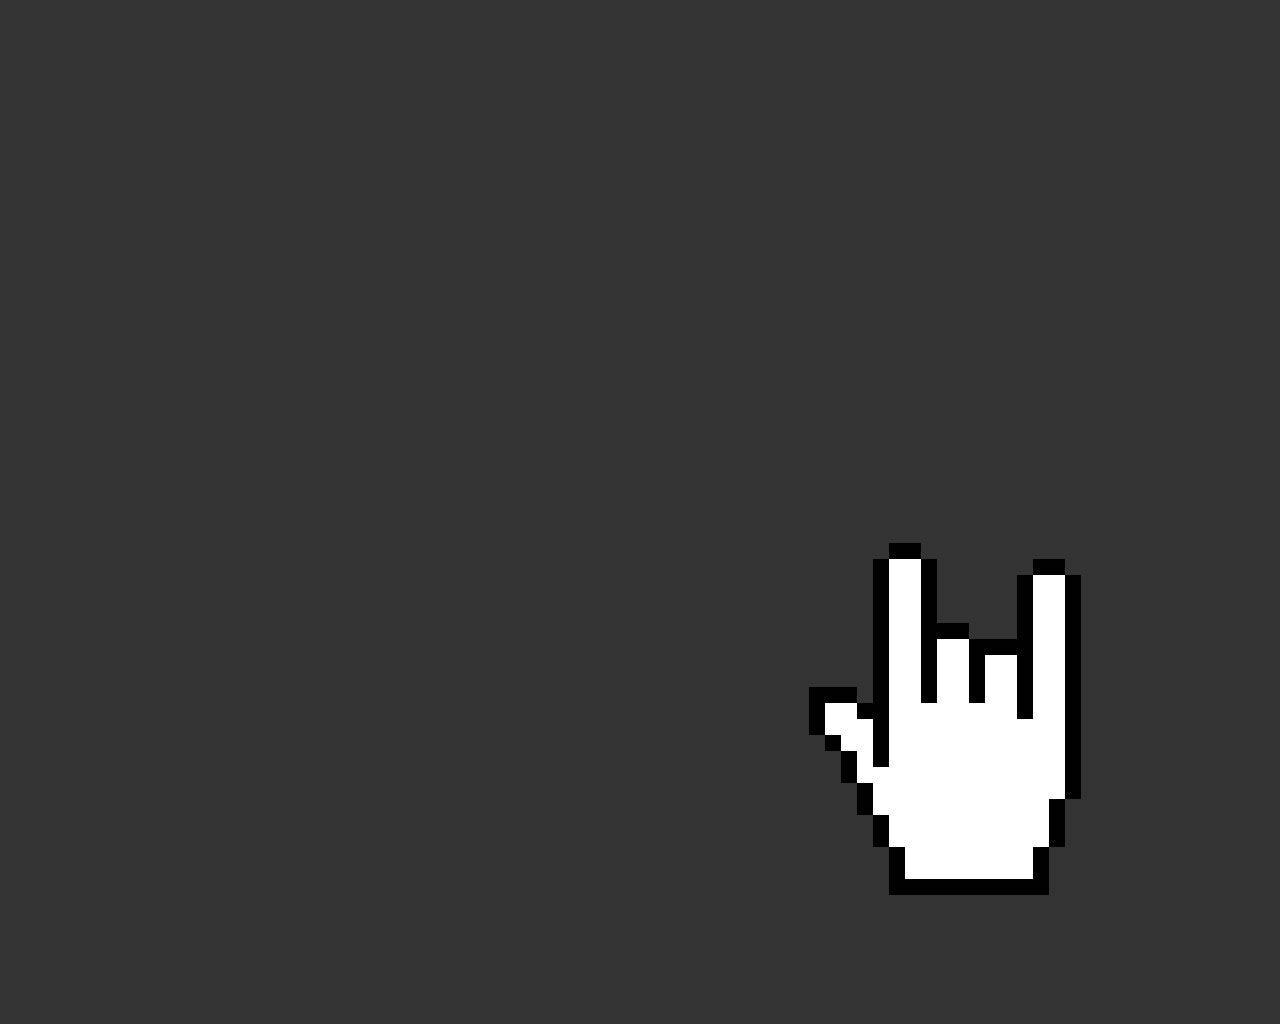 Rock And Roll Hand Gesture Minimal Wallpapers